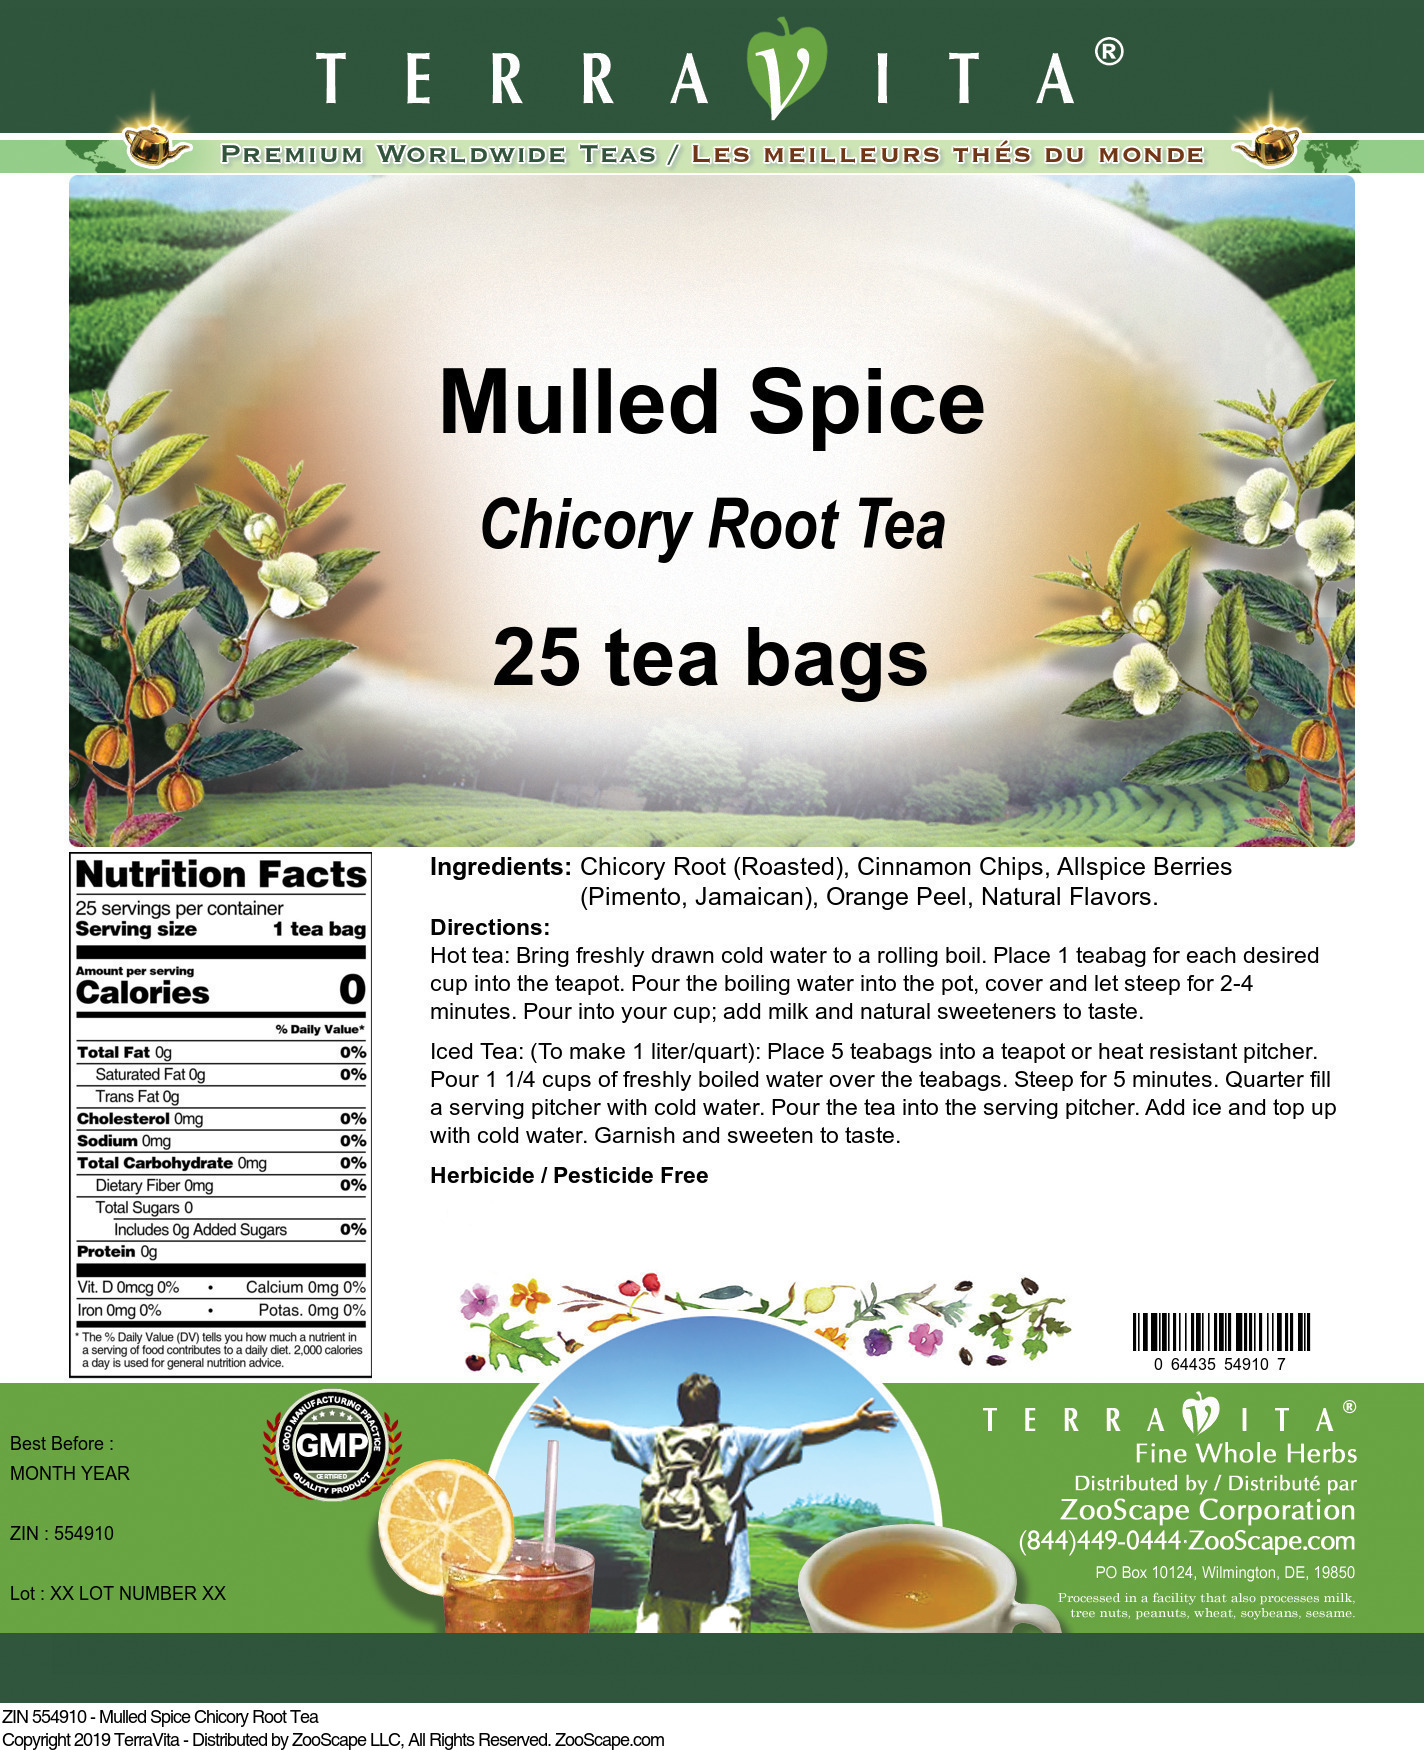 Mulled Spice Chicory Root Tea - Label